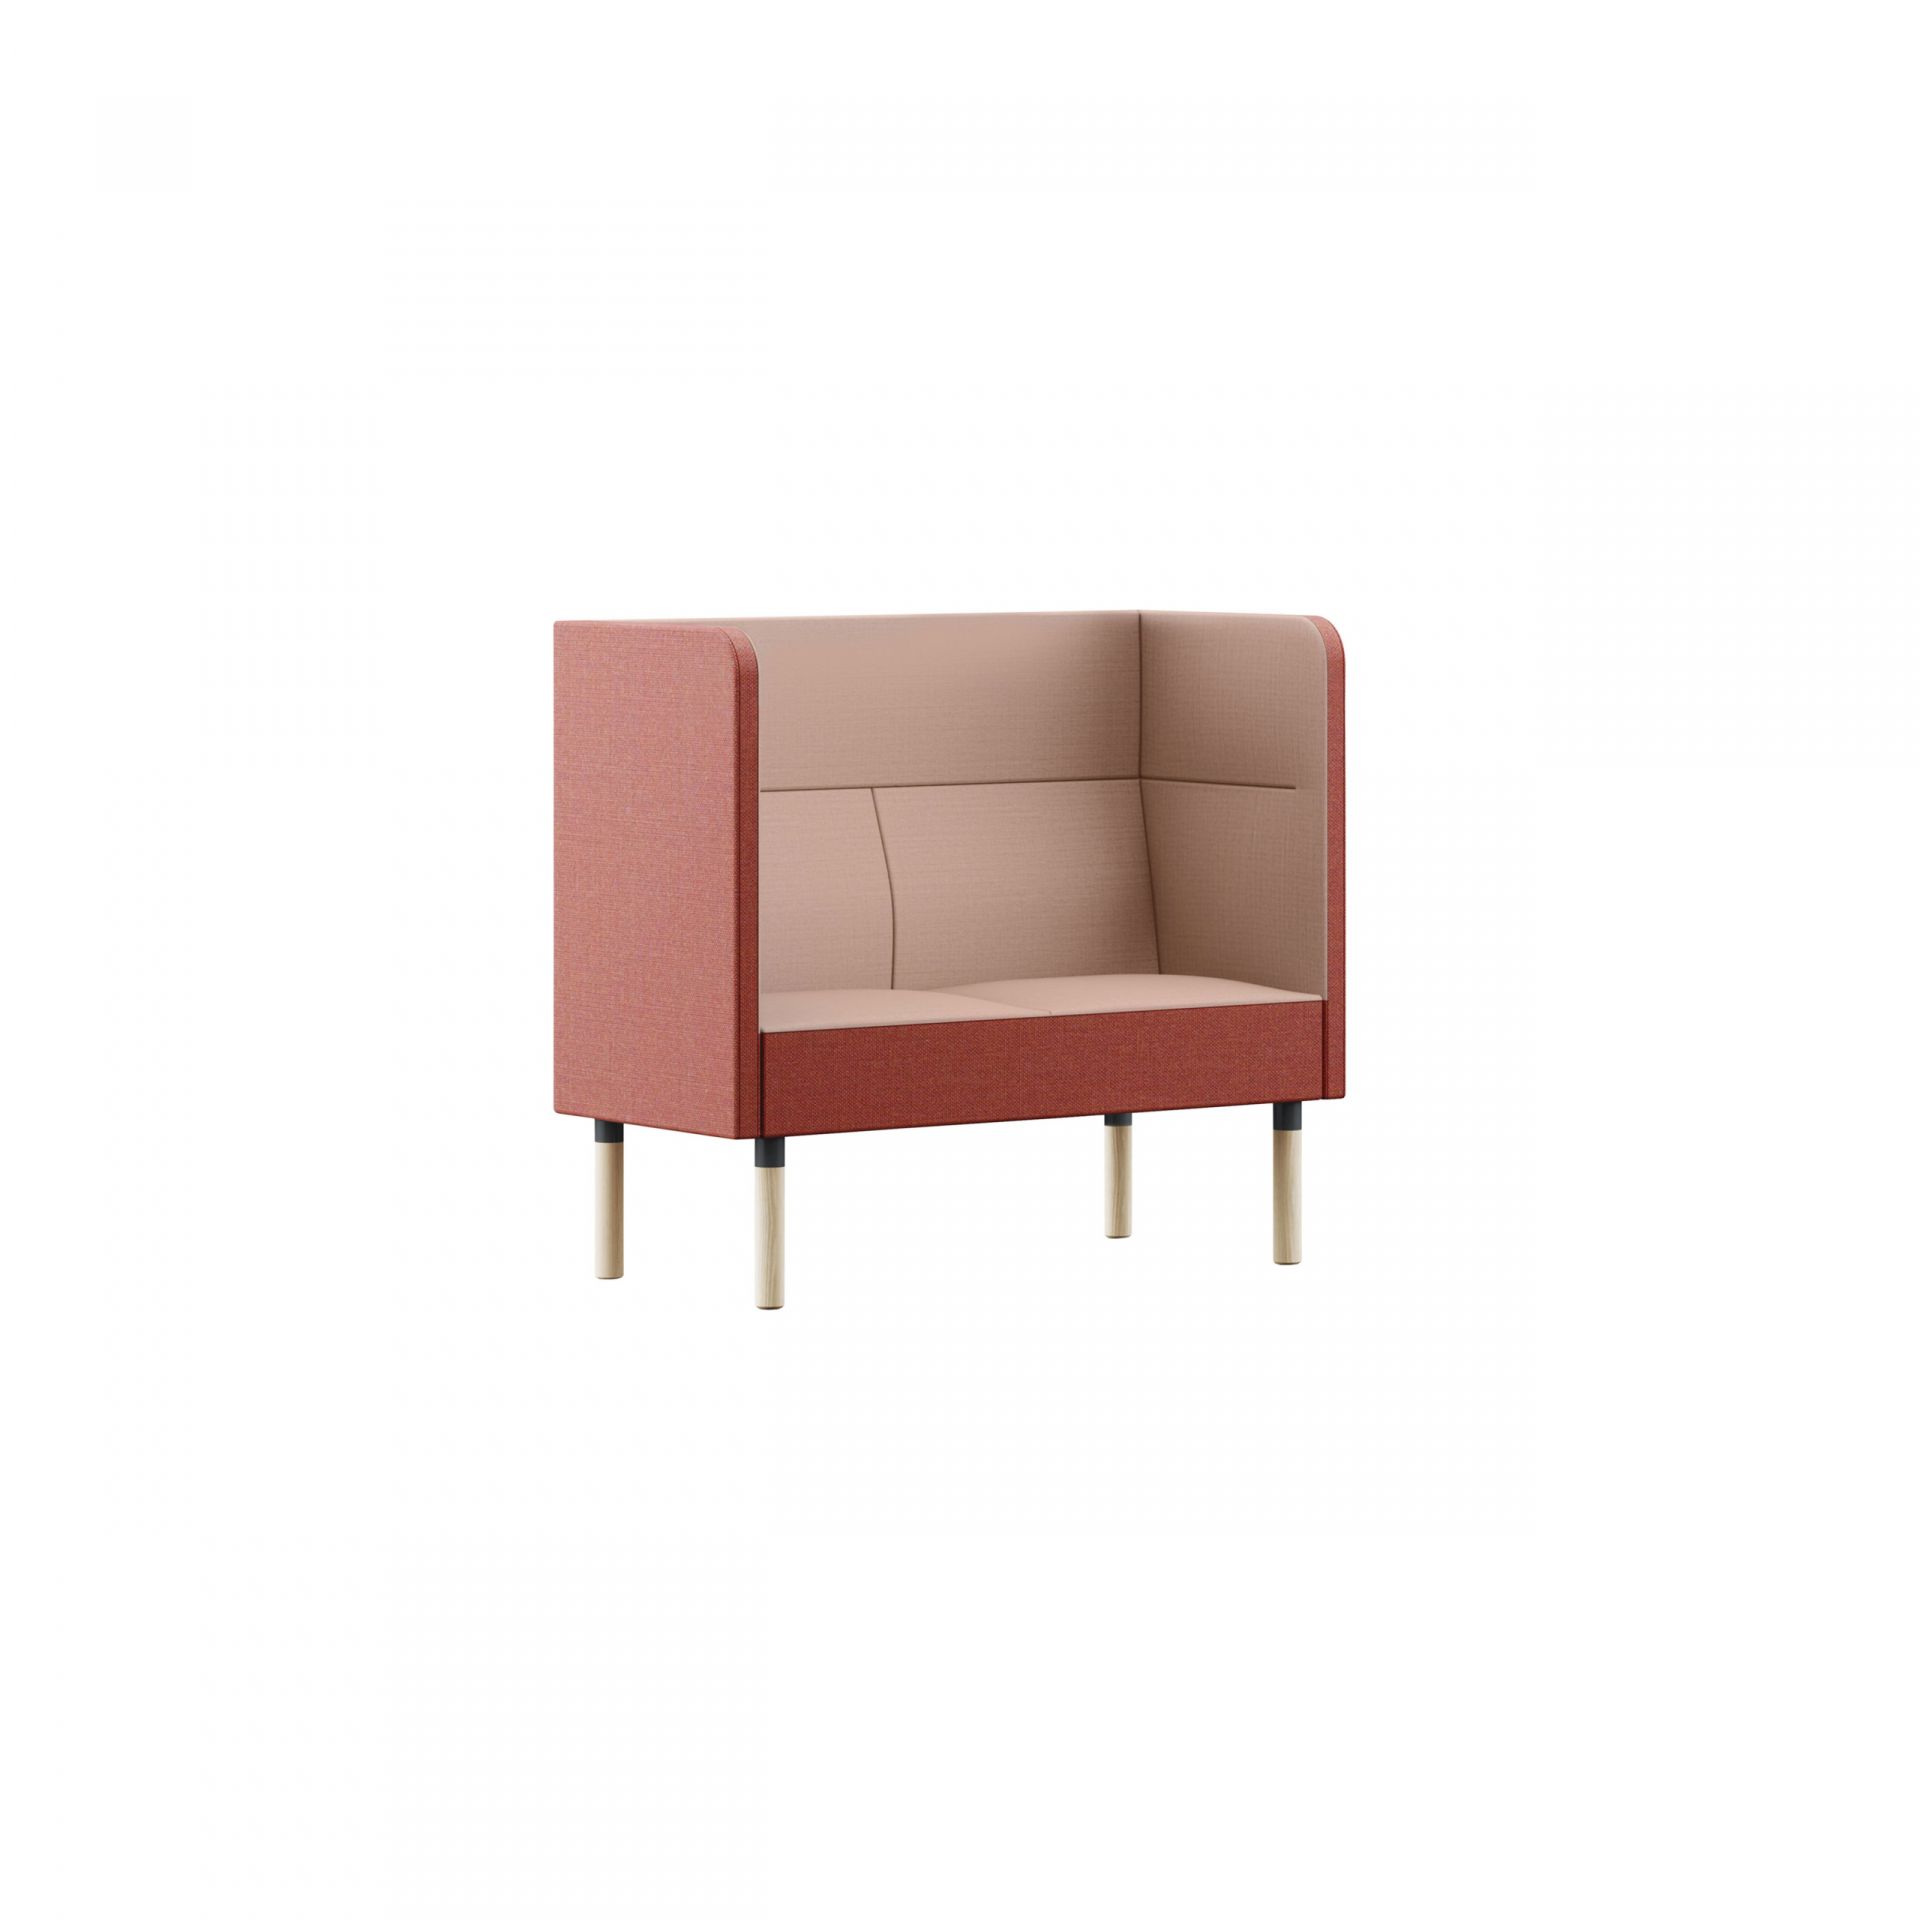 Mingle Sofa with wooden legs product image 3